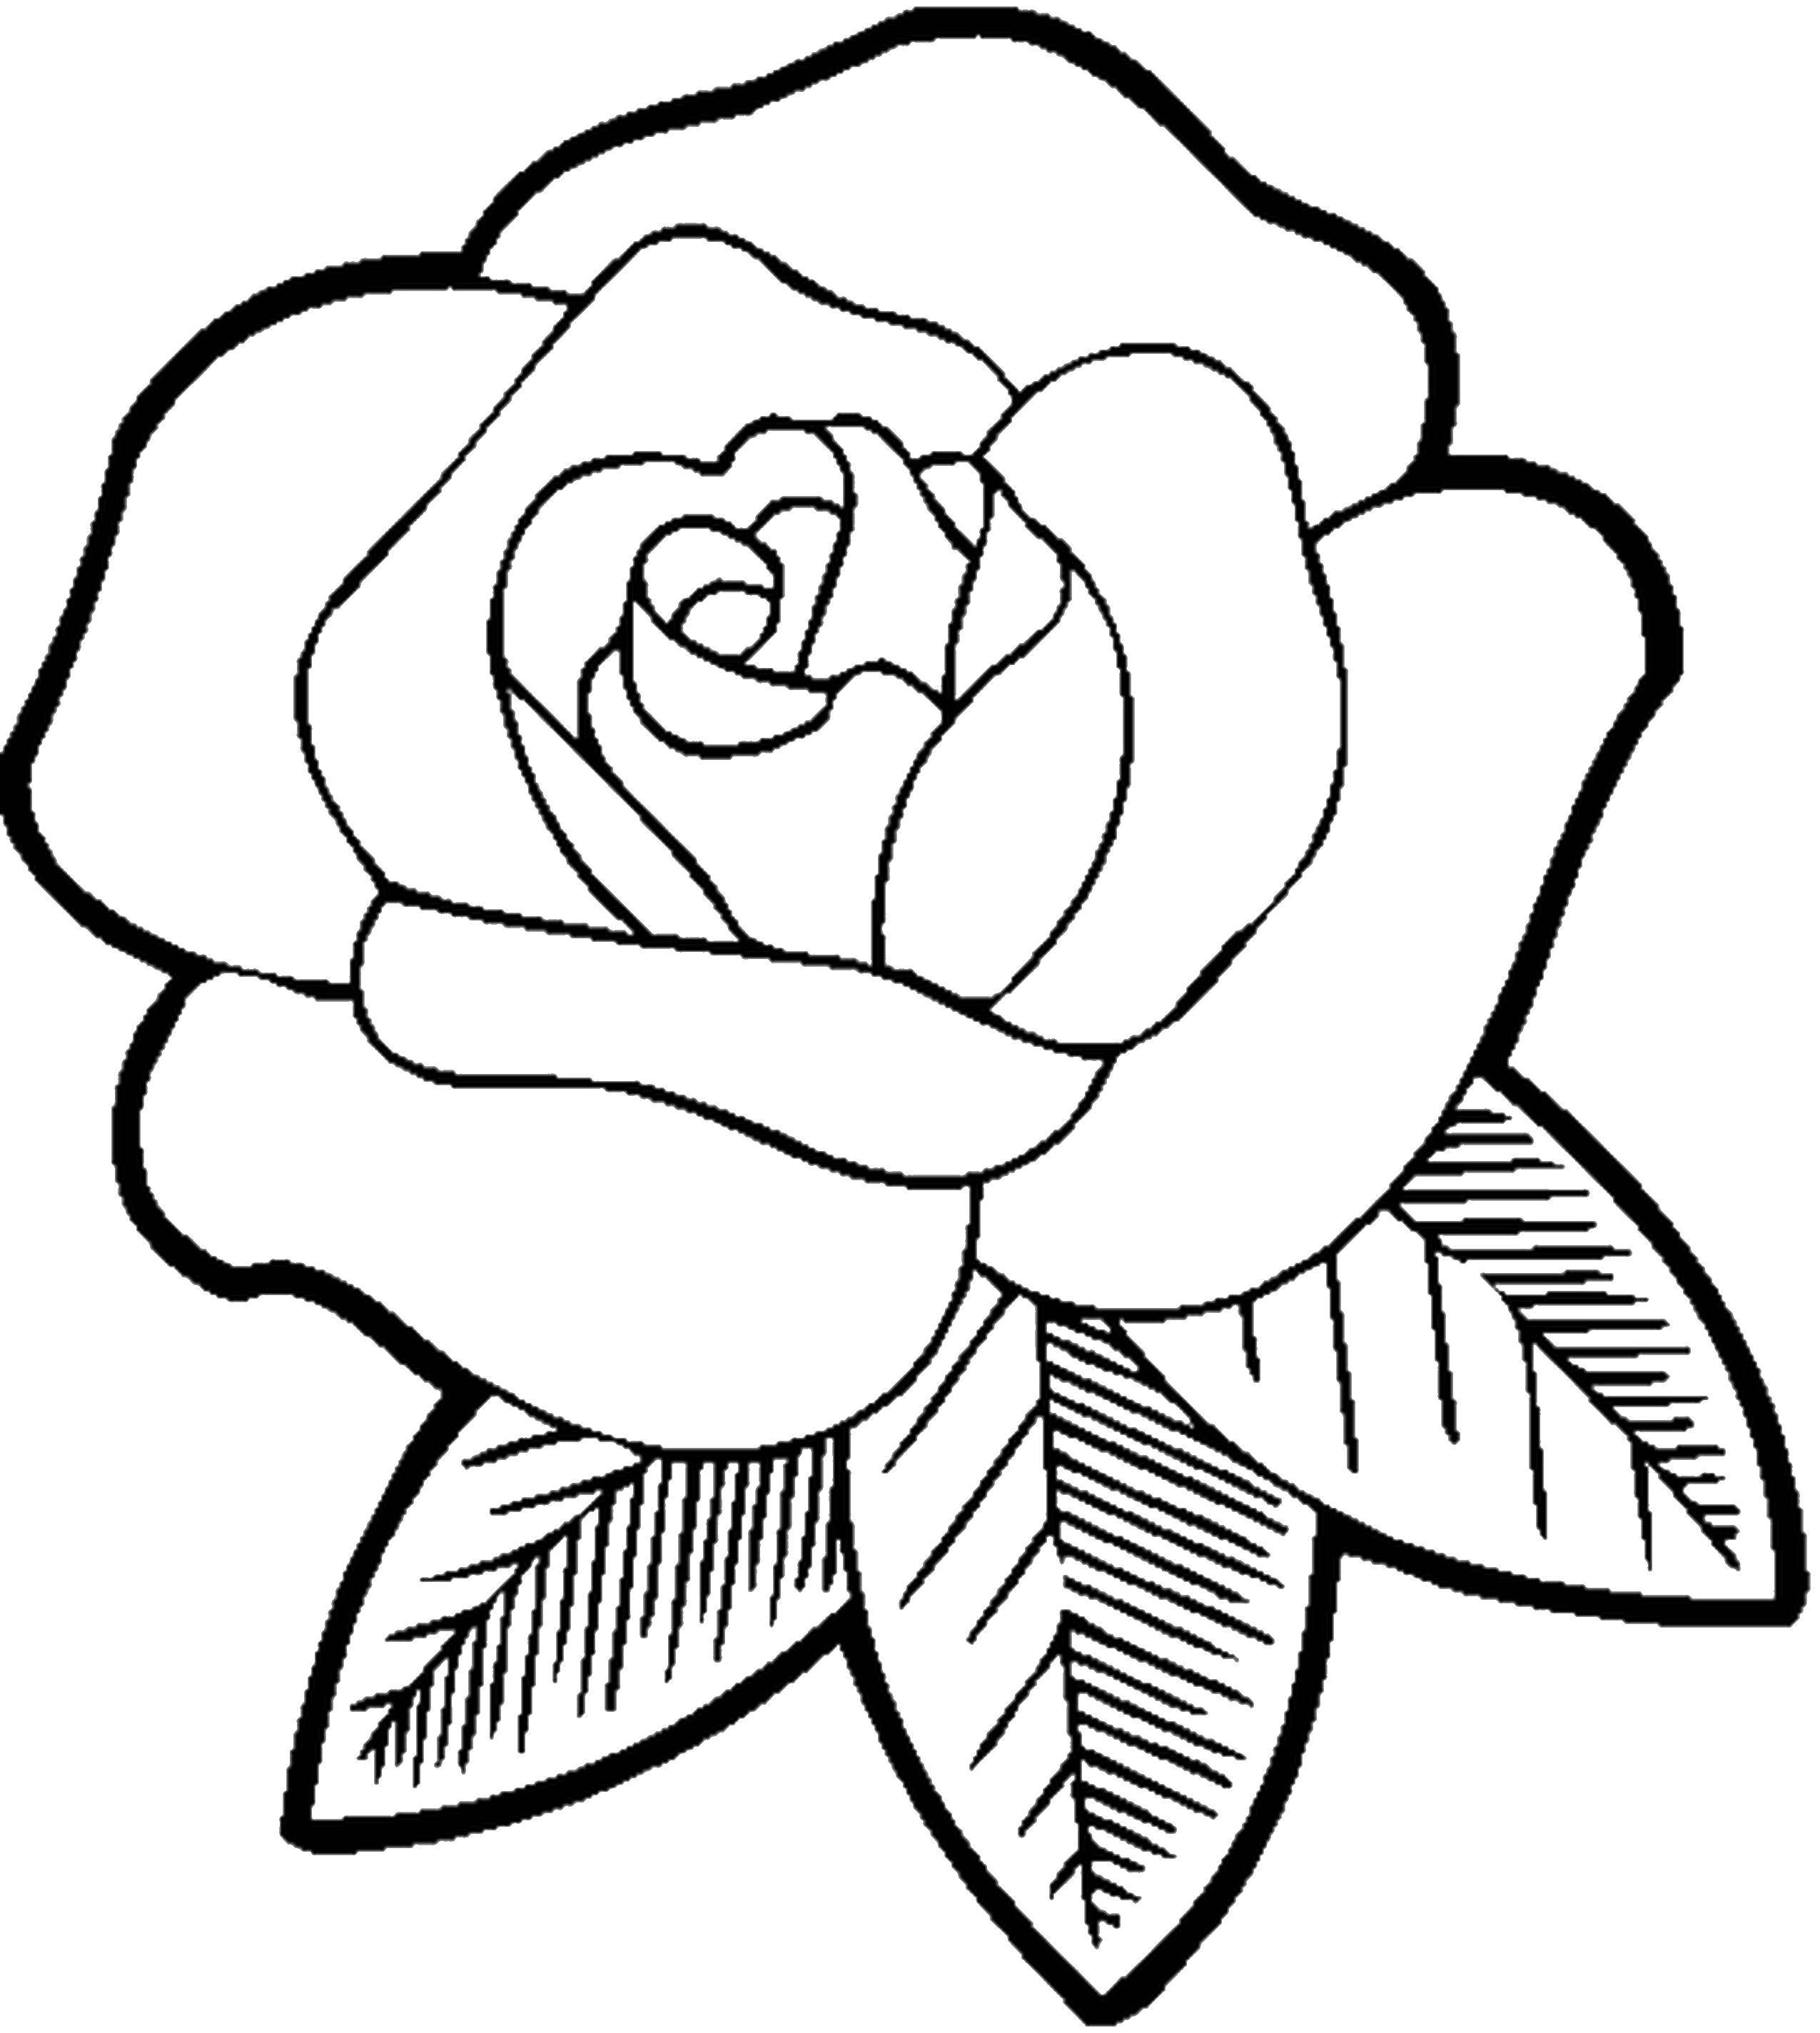 Coloring Rosette. Category flowers. Tags:  Flowers, roses.